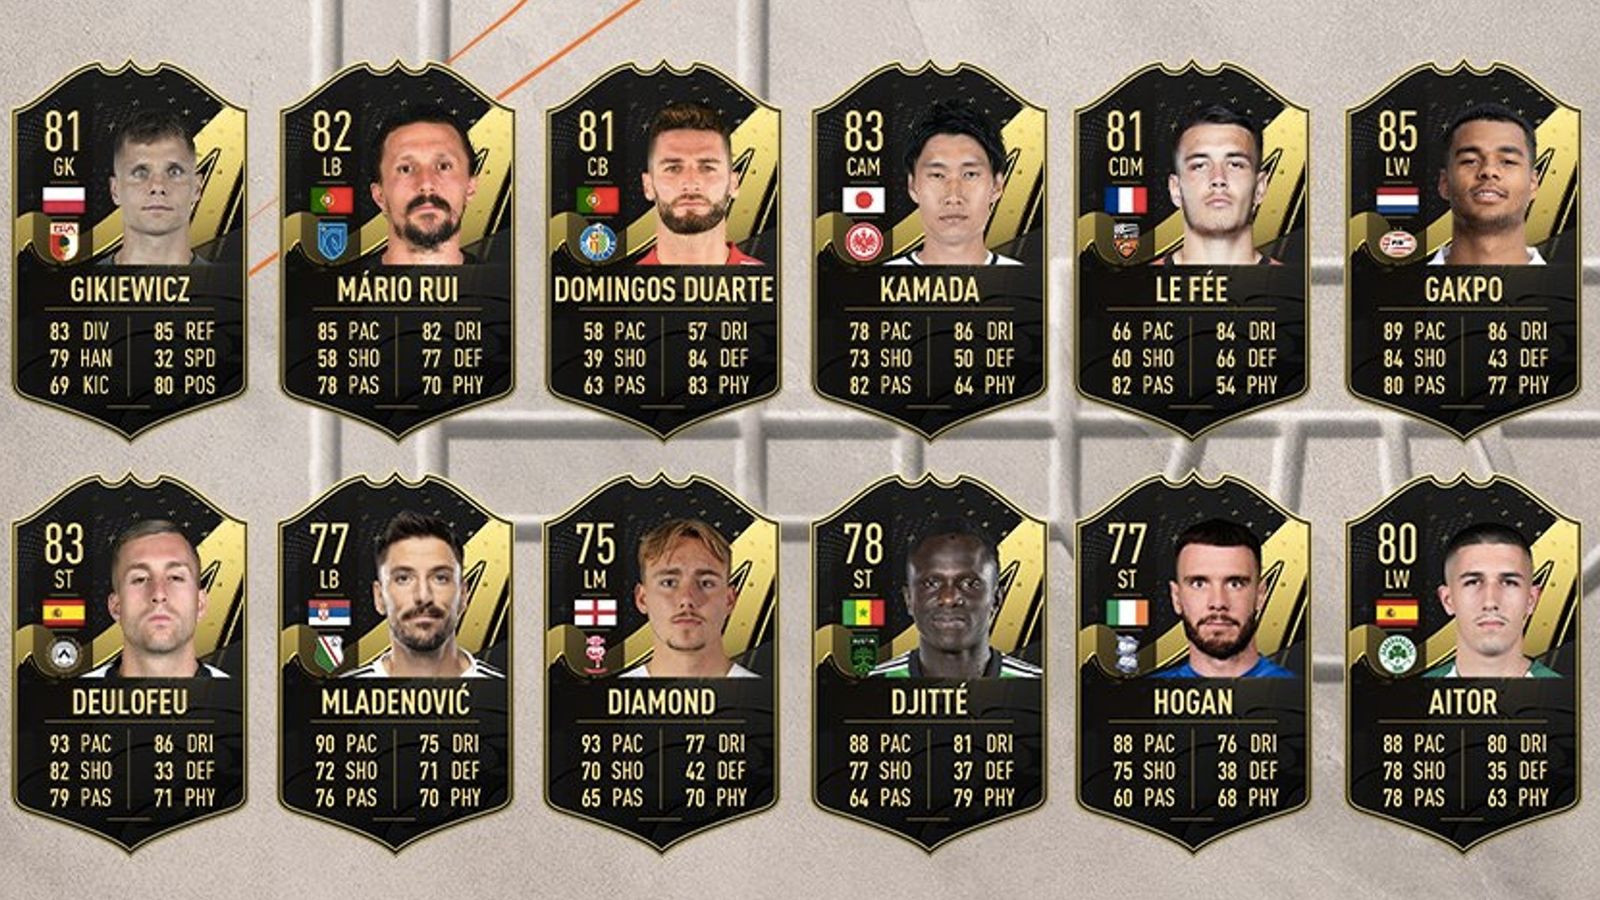 Image of TOTW 1 players in FIFA 23.